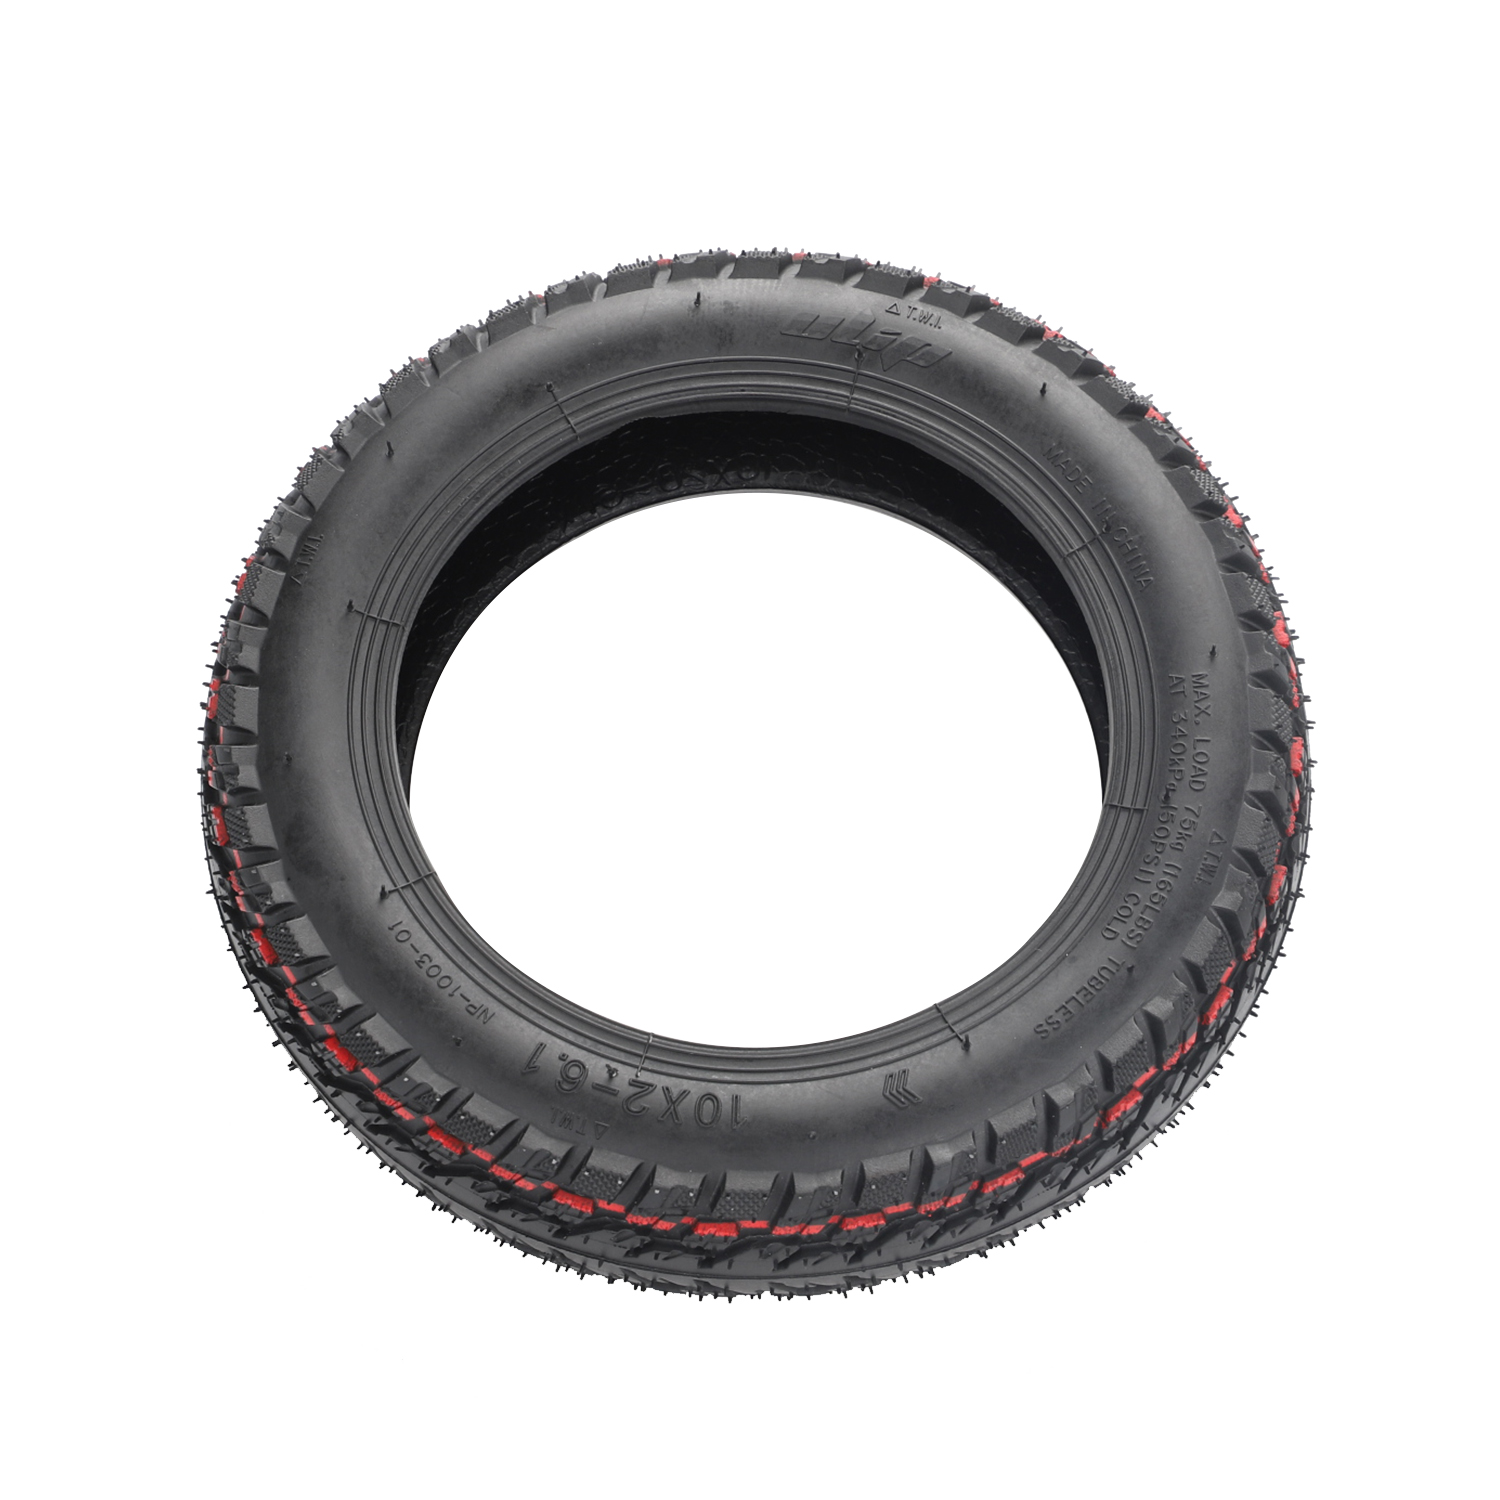 Find BIKIGHT 10*2-6.1 10 inch Electric Scooter Tyre High Performance E-Bike Off-Road Vacuum Outer Tires for Xiaomi M365/Pro/Pro2/1S/Xiaomi 3/Lite for Sale on Gipsybee.com with cryptocurrencies